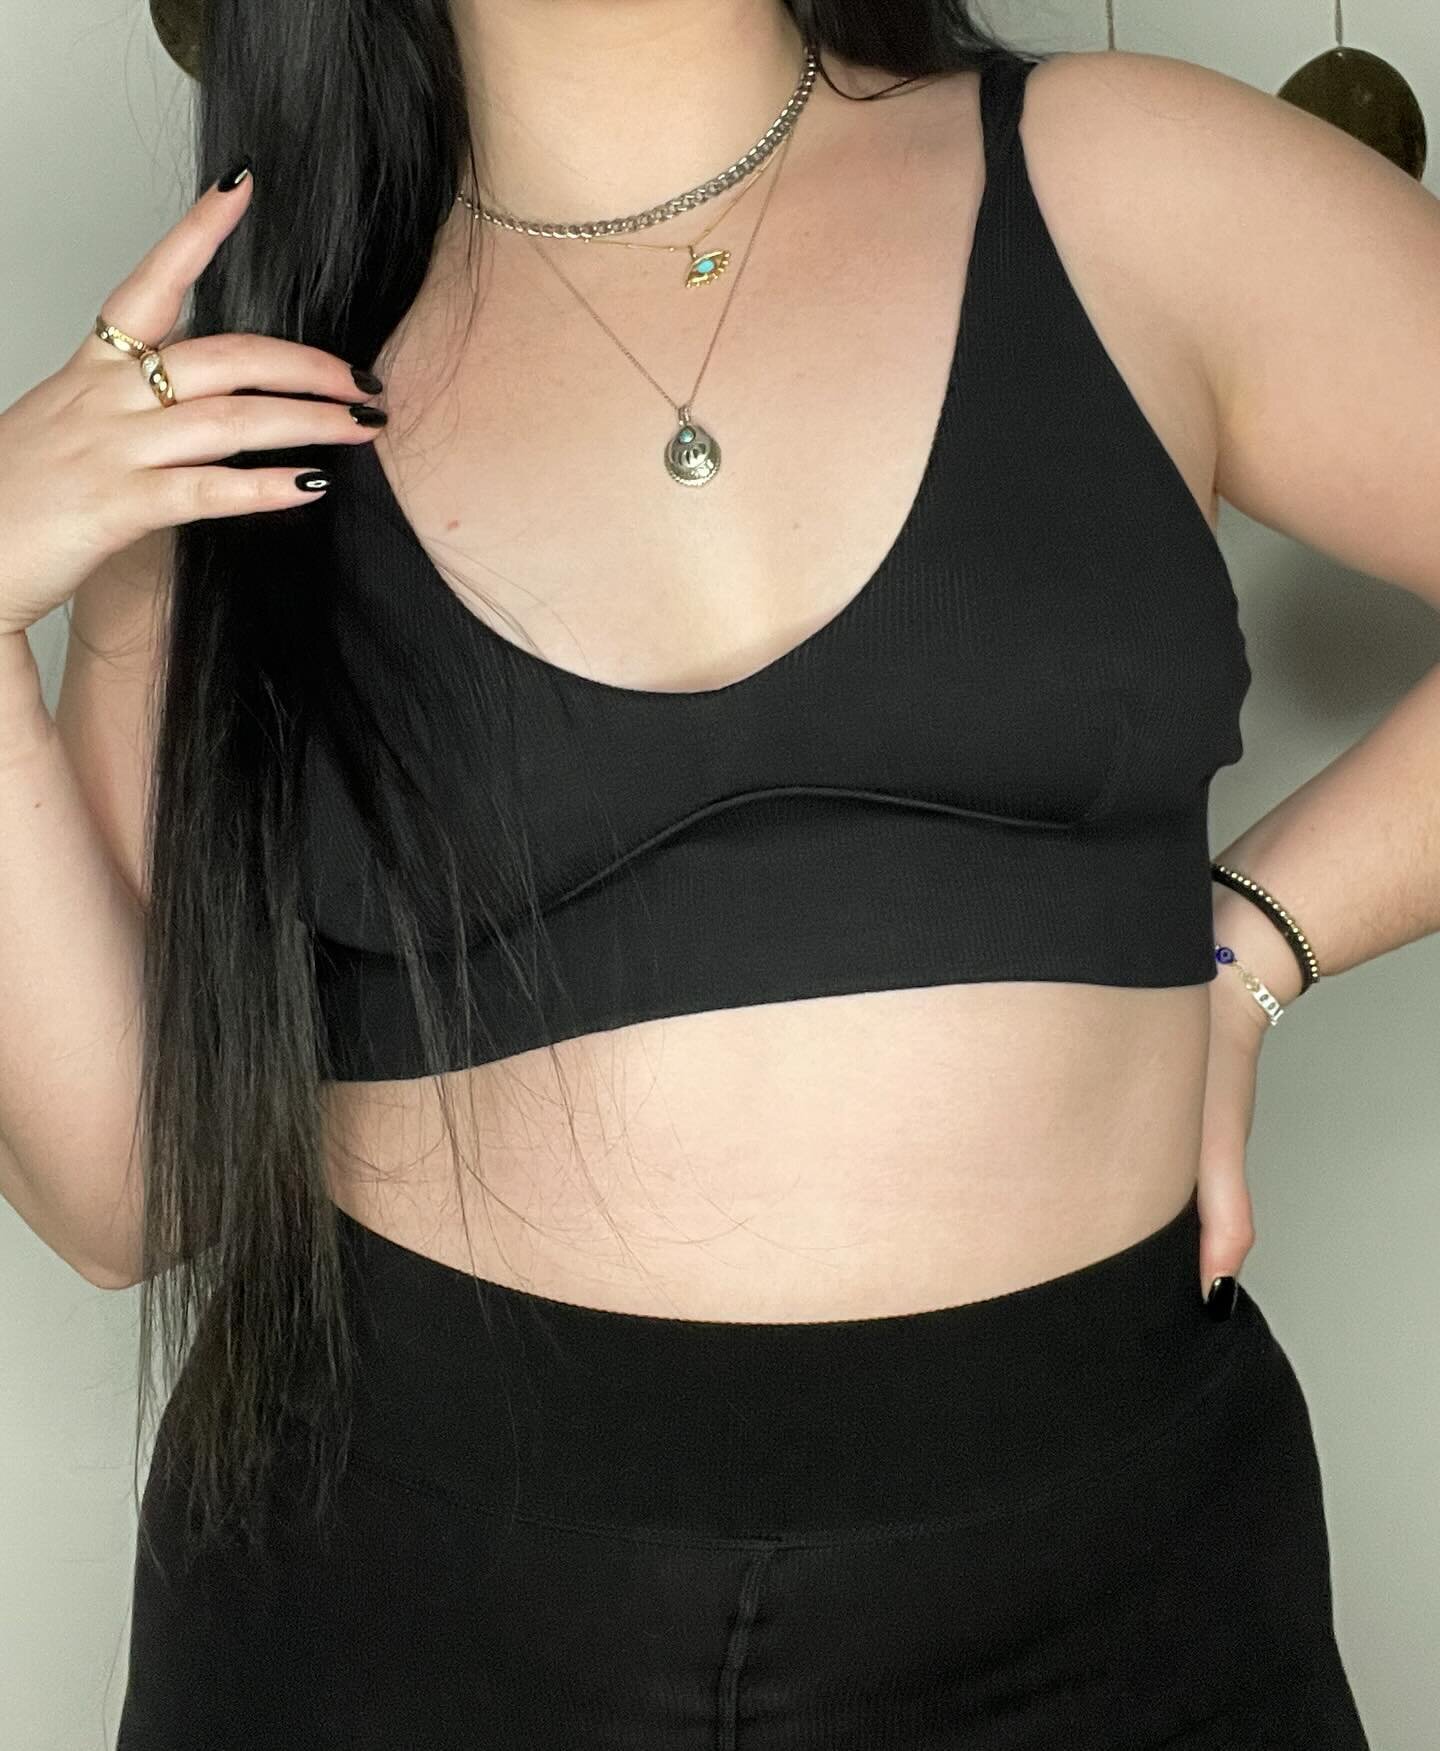 collecting @parade lush rib bralettes like they&rsquo;re pok&eacute;mon 🖤🤎💚 use my code theclunkster for 20% off to get your parad&eacute;dex started 💥

#parade #paradeunderwear #paradepartner #ParadeCastingCall #paradefriends #bralette #bralette